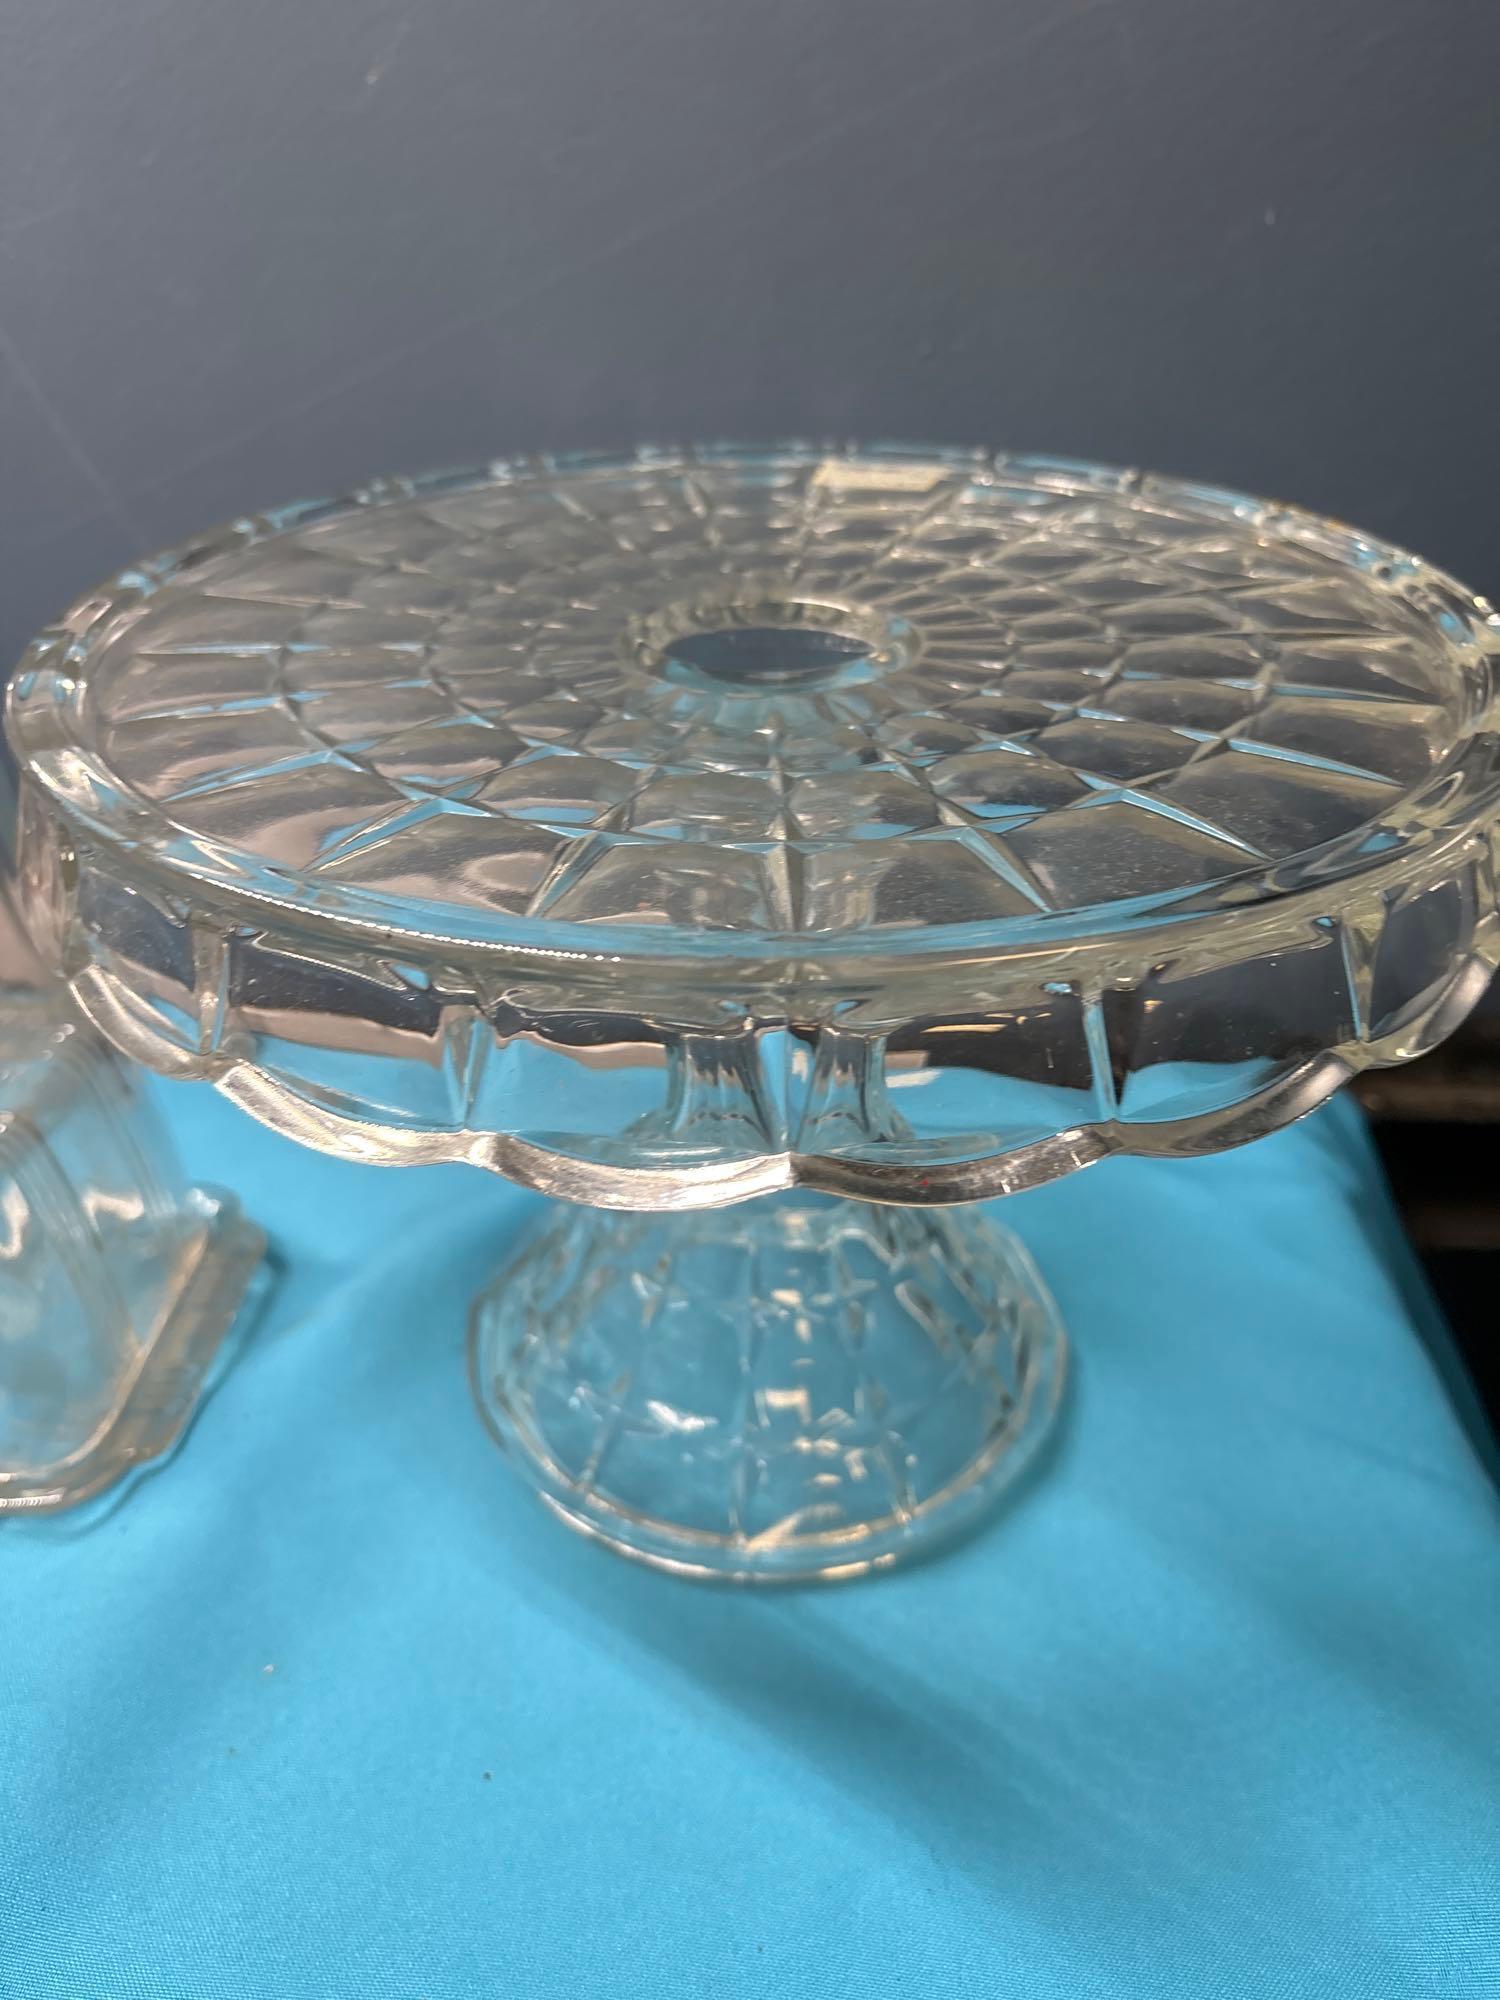 Glass cake stand ball pitcher condiment tray large covered butter three boxes full